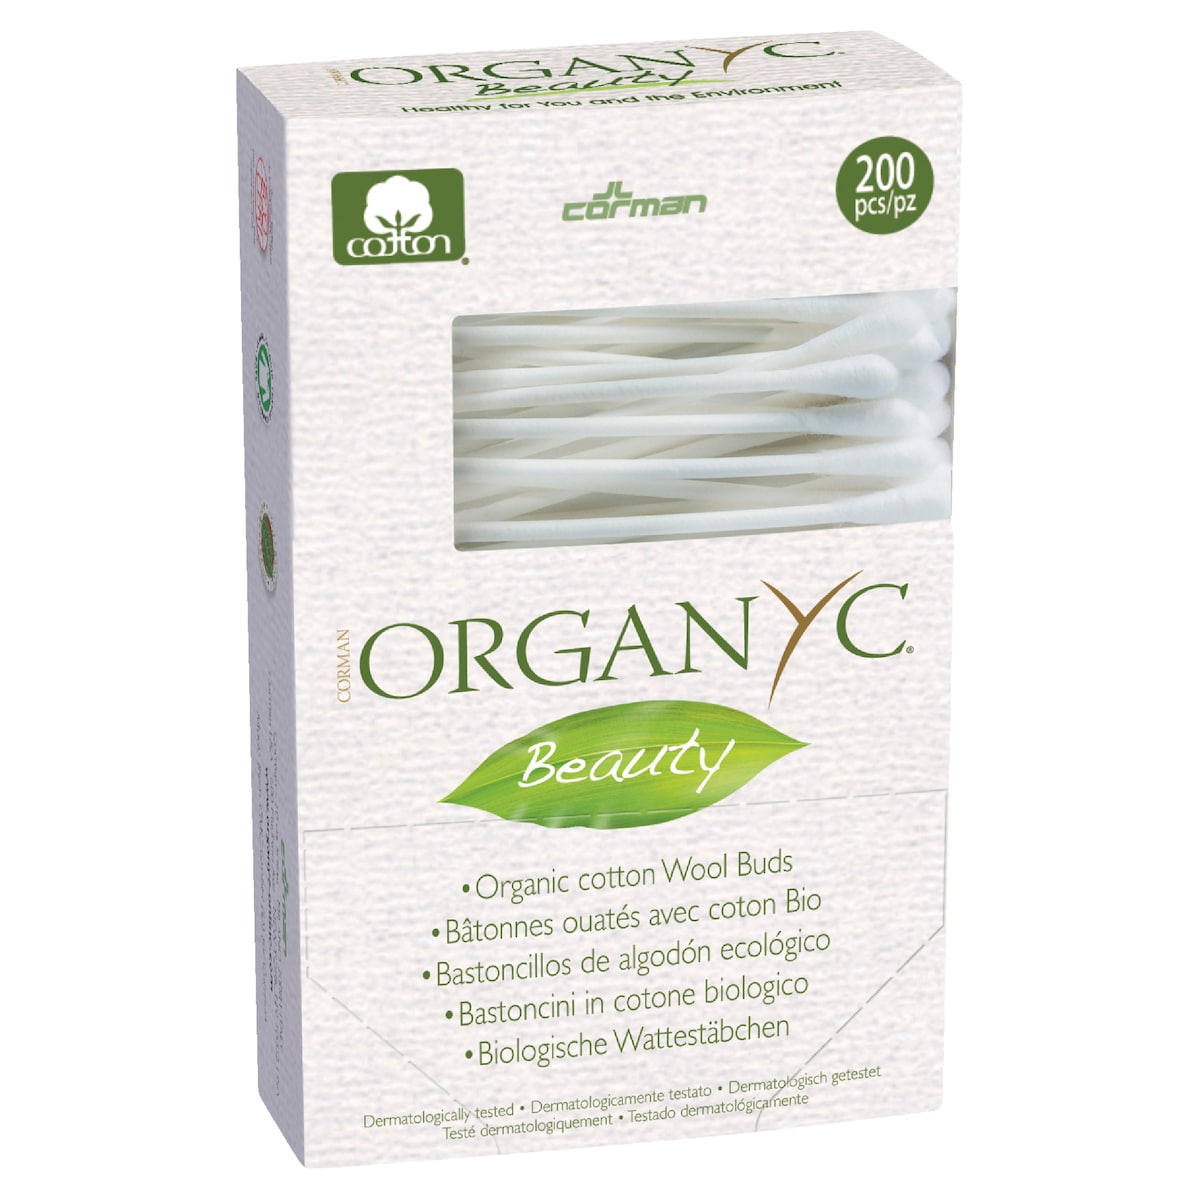 Organyc Beauty Cotton Buds 200 Pack